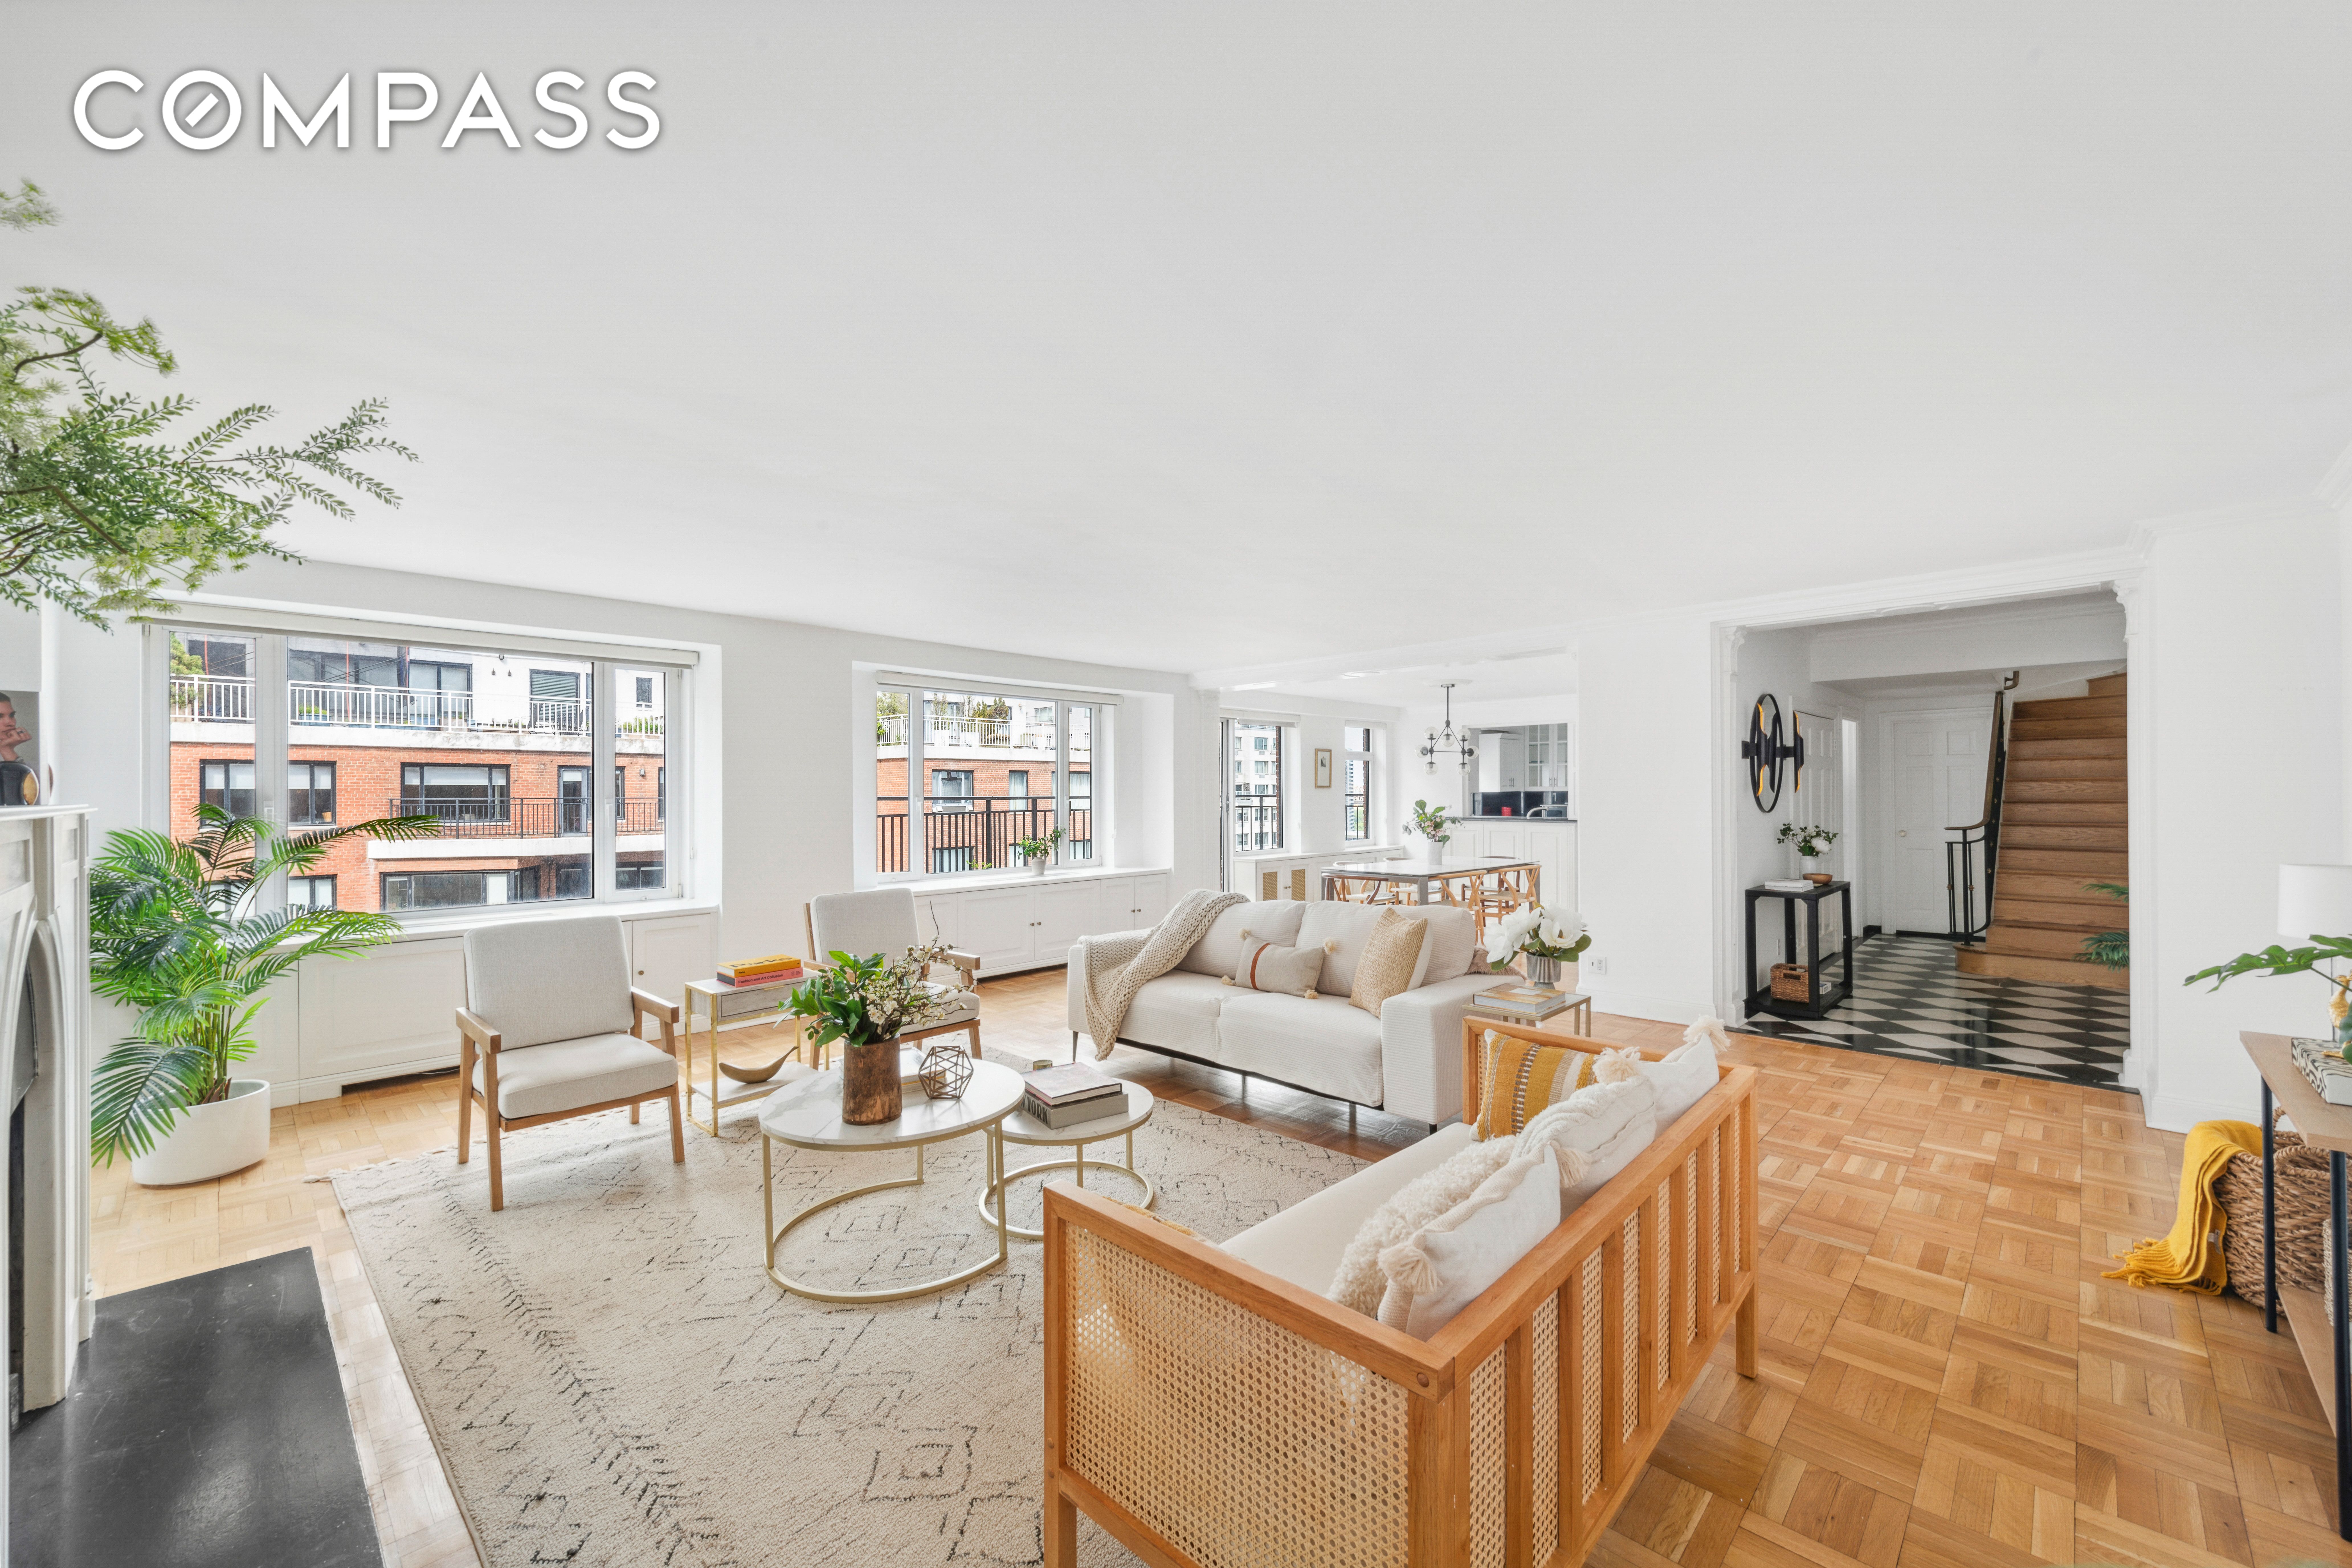 60 Sutton Place Phcsouth, Sutton Place, Midtown East, NYC - 3 Bedrooms  
3.5 Bathrooms  
6 Rooms - 